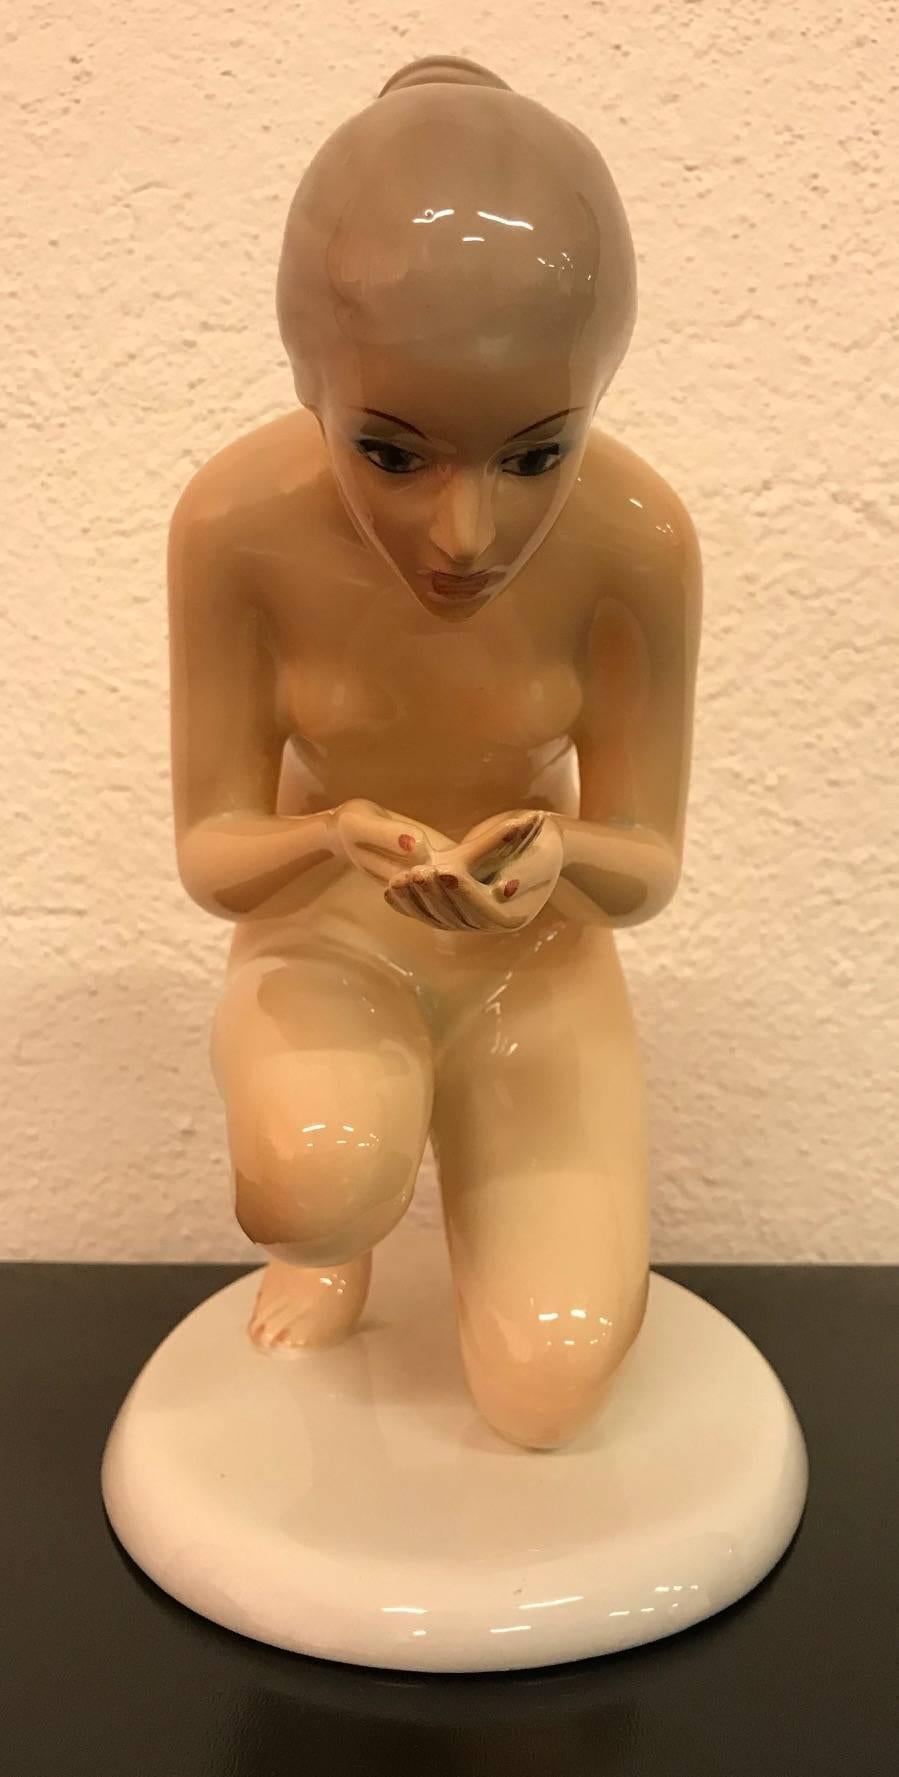 This beautiful statue was created in Italy in the 1950s by Ronzan.
It represents a female drinking figure.
Signed and numbered under the base.